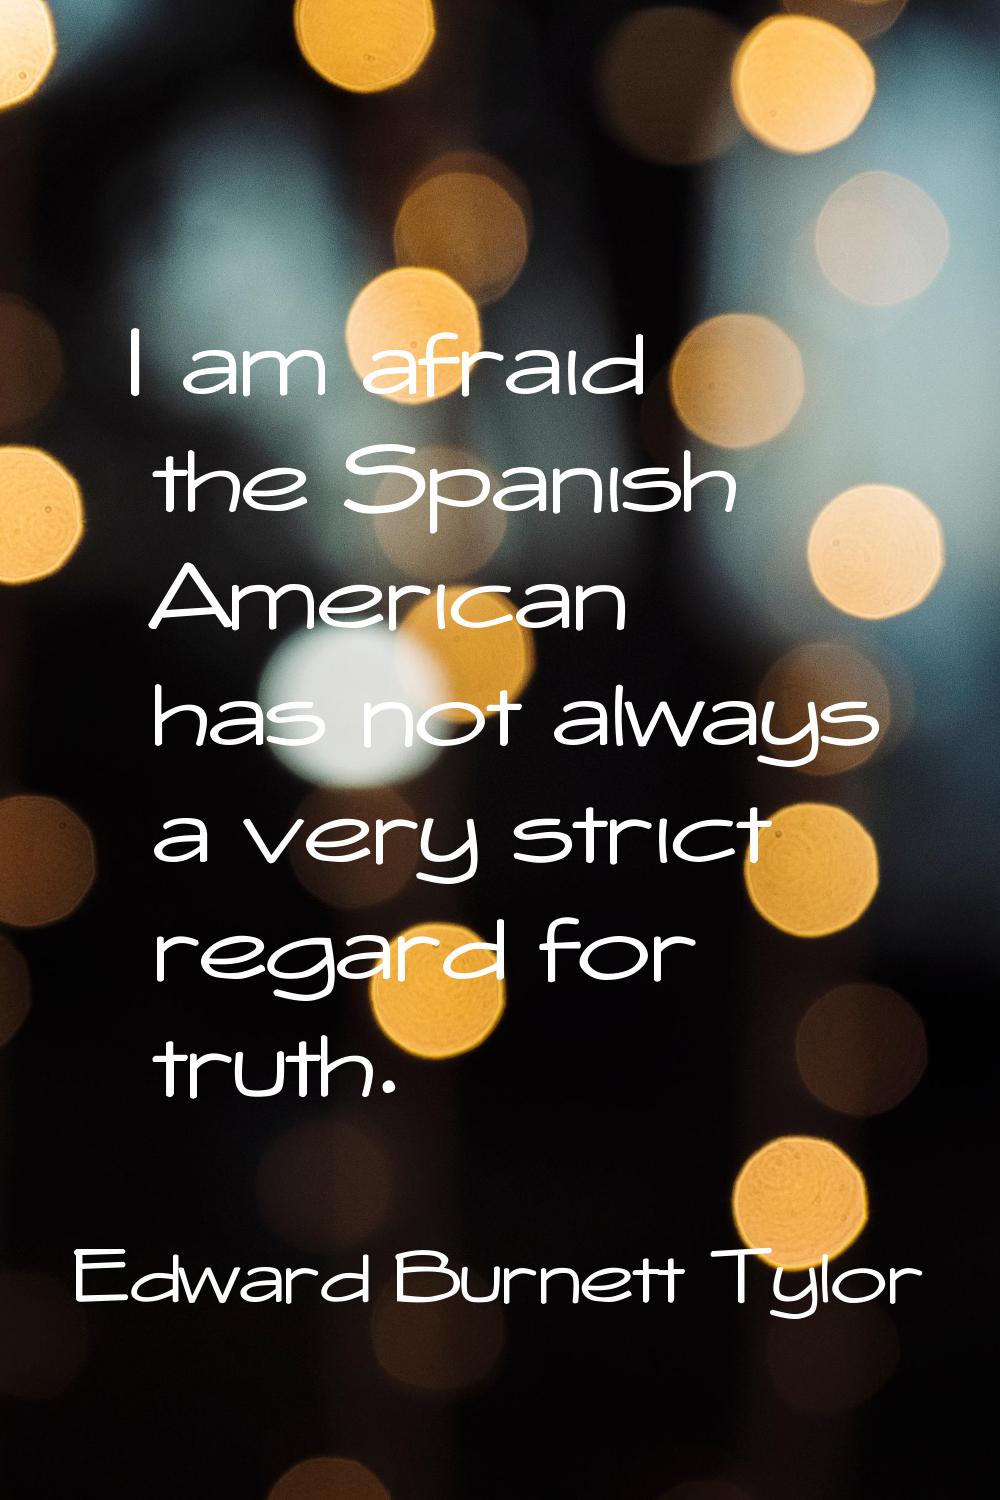 I am afraid the Spanish American has not always a very strict regard for truth.